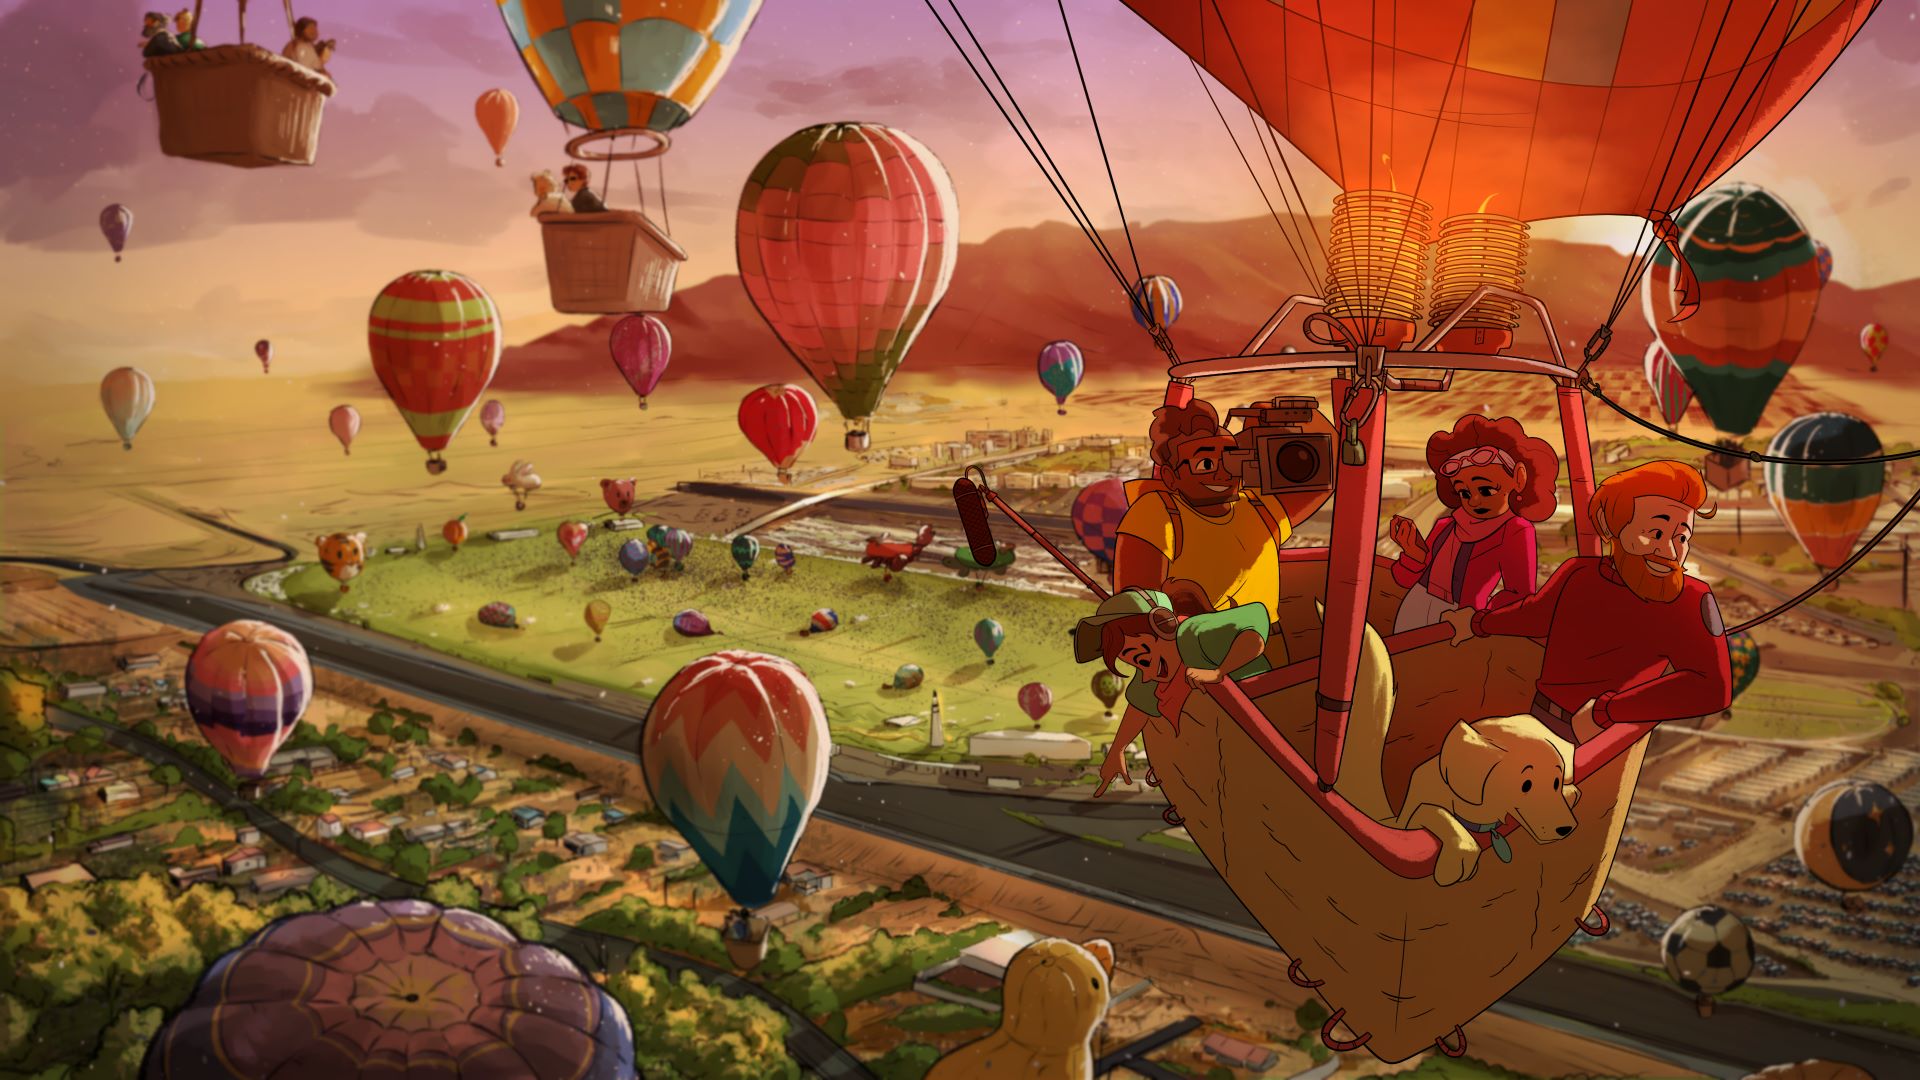 Finished image of characters in a hot air balloon